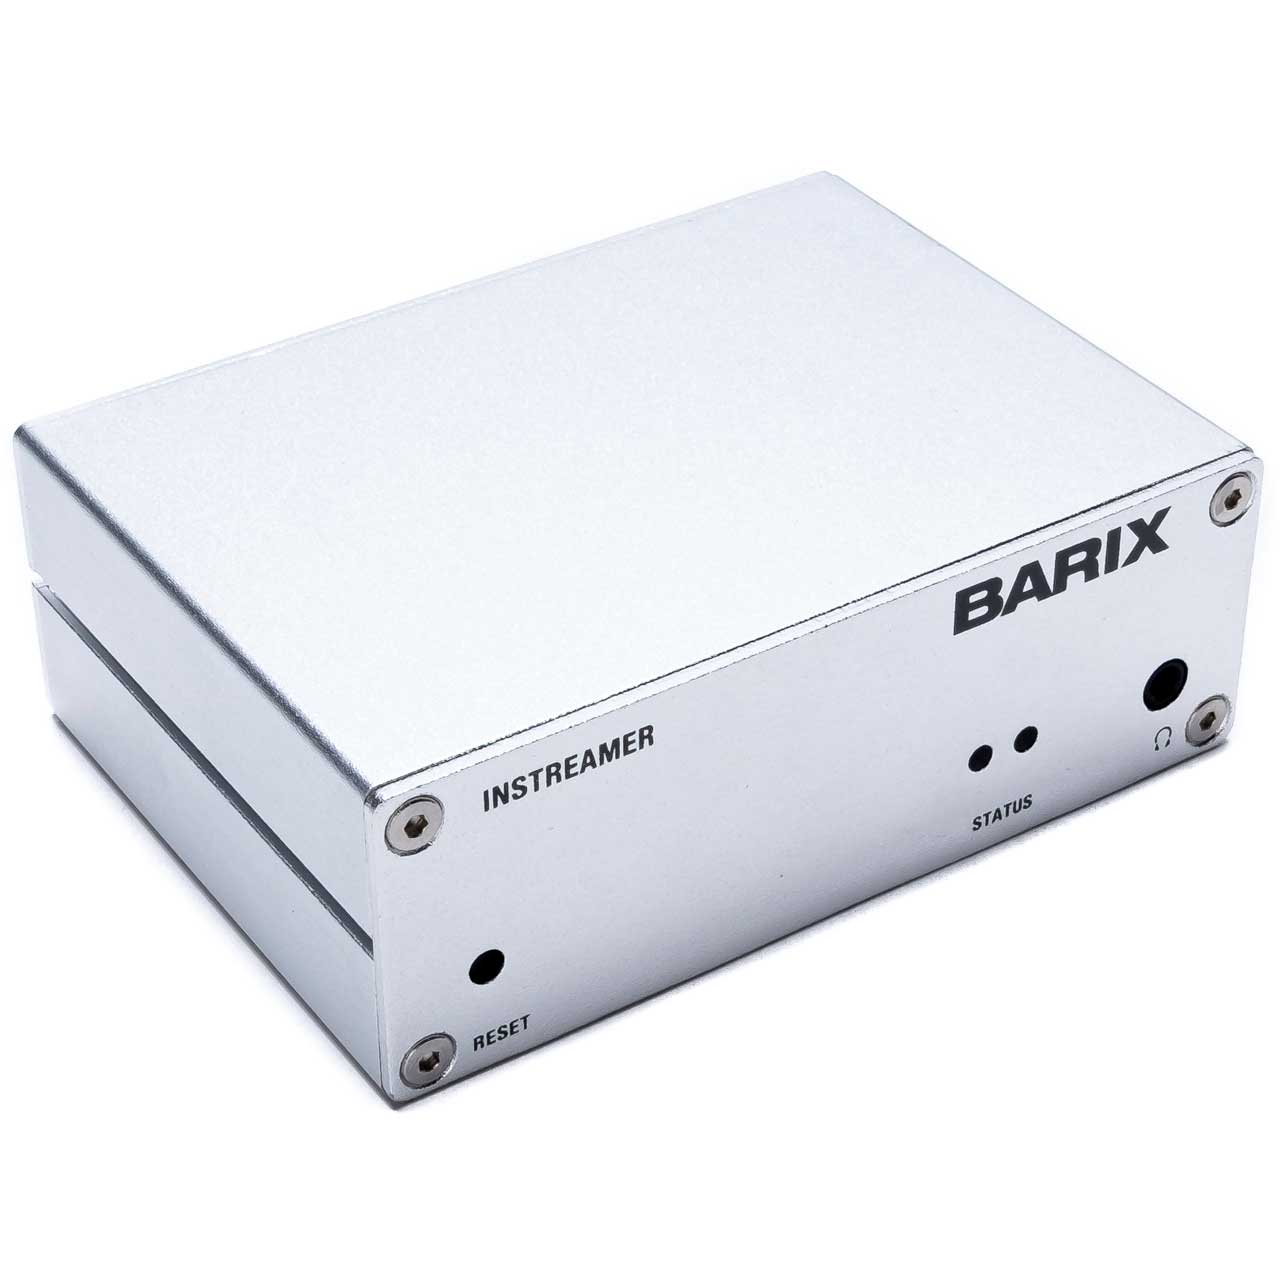 Barix Instreamer Multiprotocol Audio Over IP Encoder - B-Stock Unit - This unit is Missing the Original Box 2012.9123